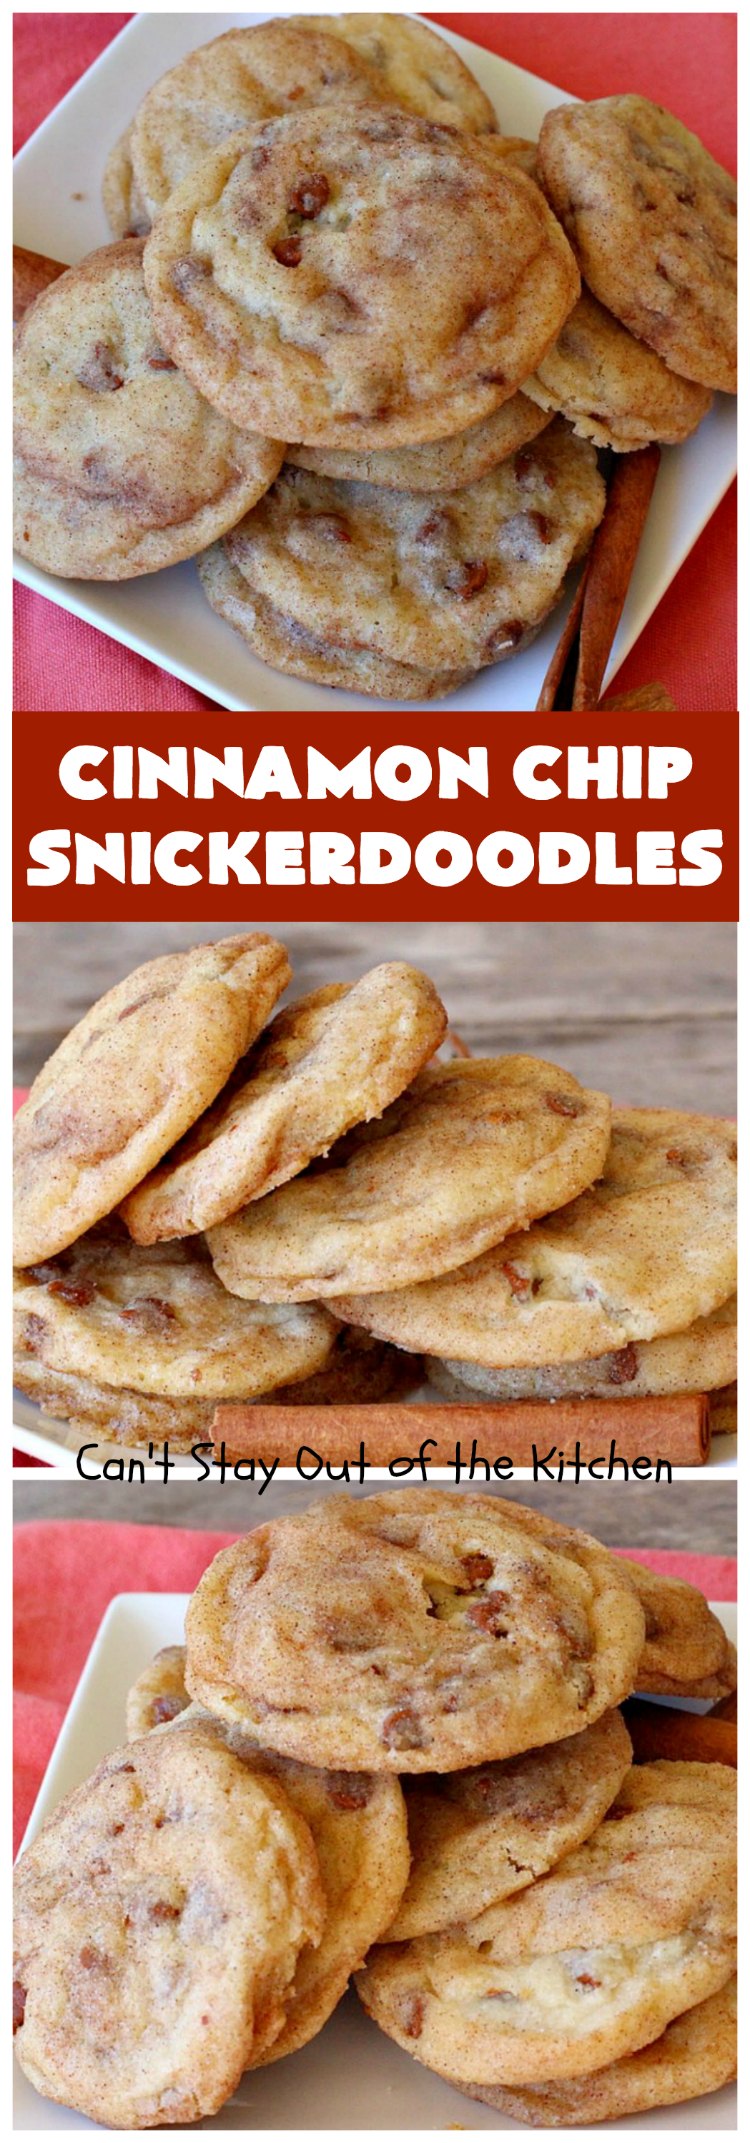 Cinnamon Chip Snickerdoodles | Can't Stay Out of the Kitchen